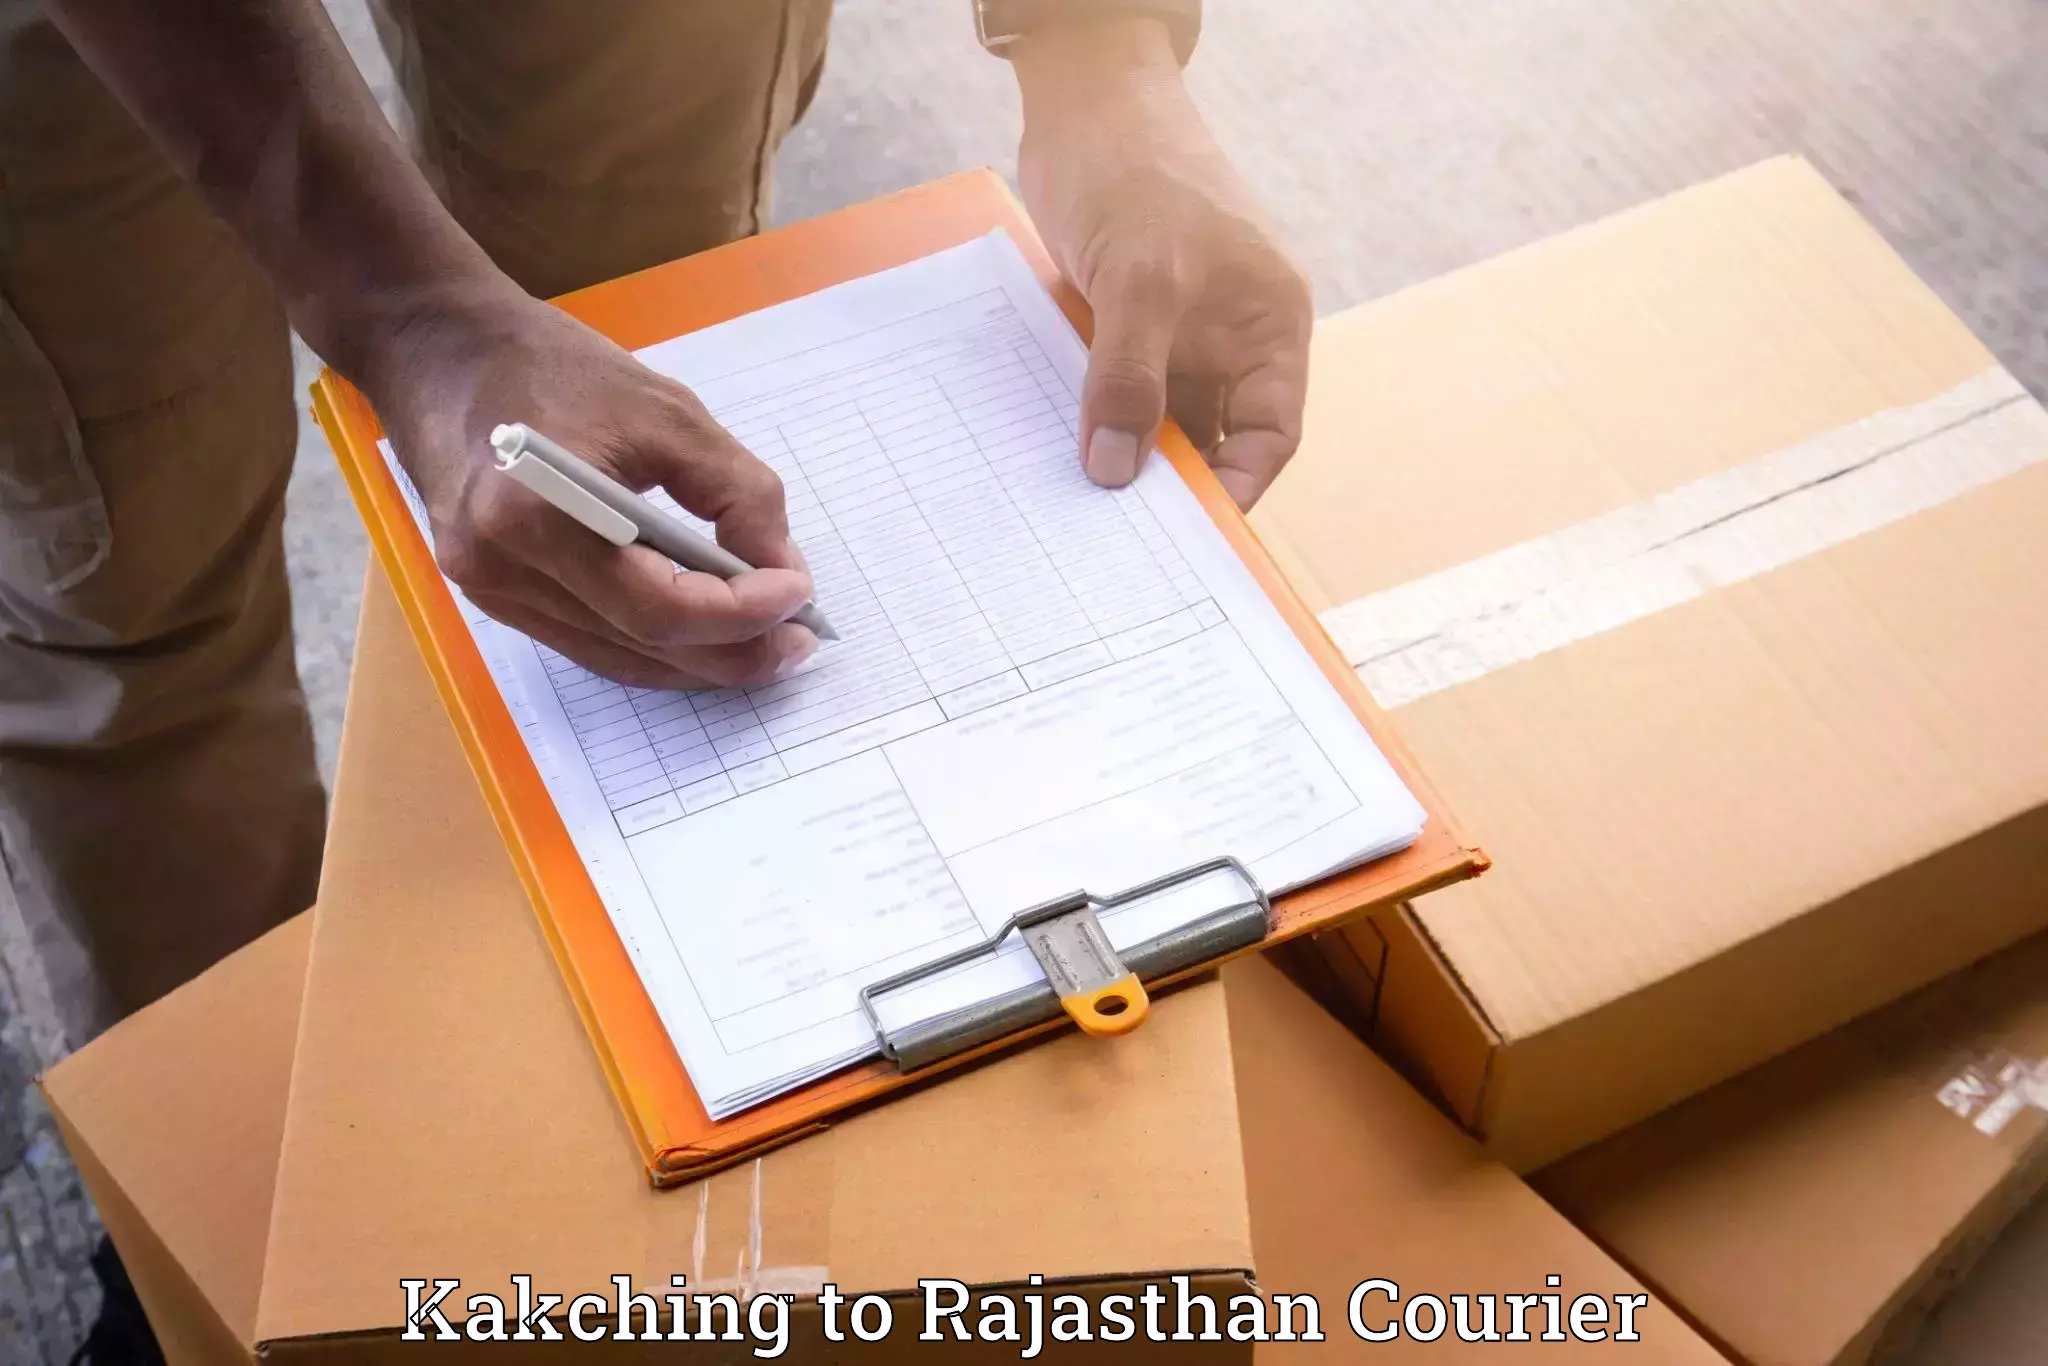 Professional moving company Kakching to Rajasthan